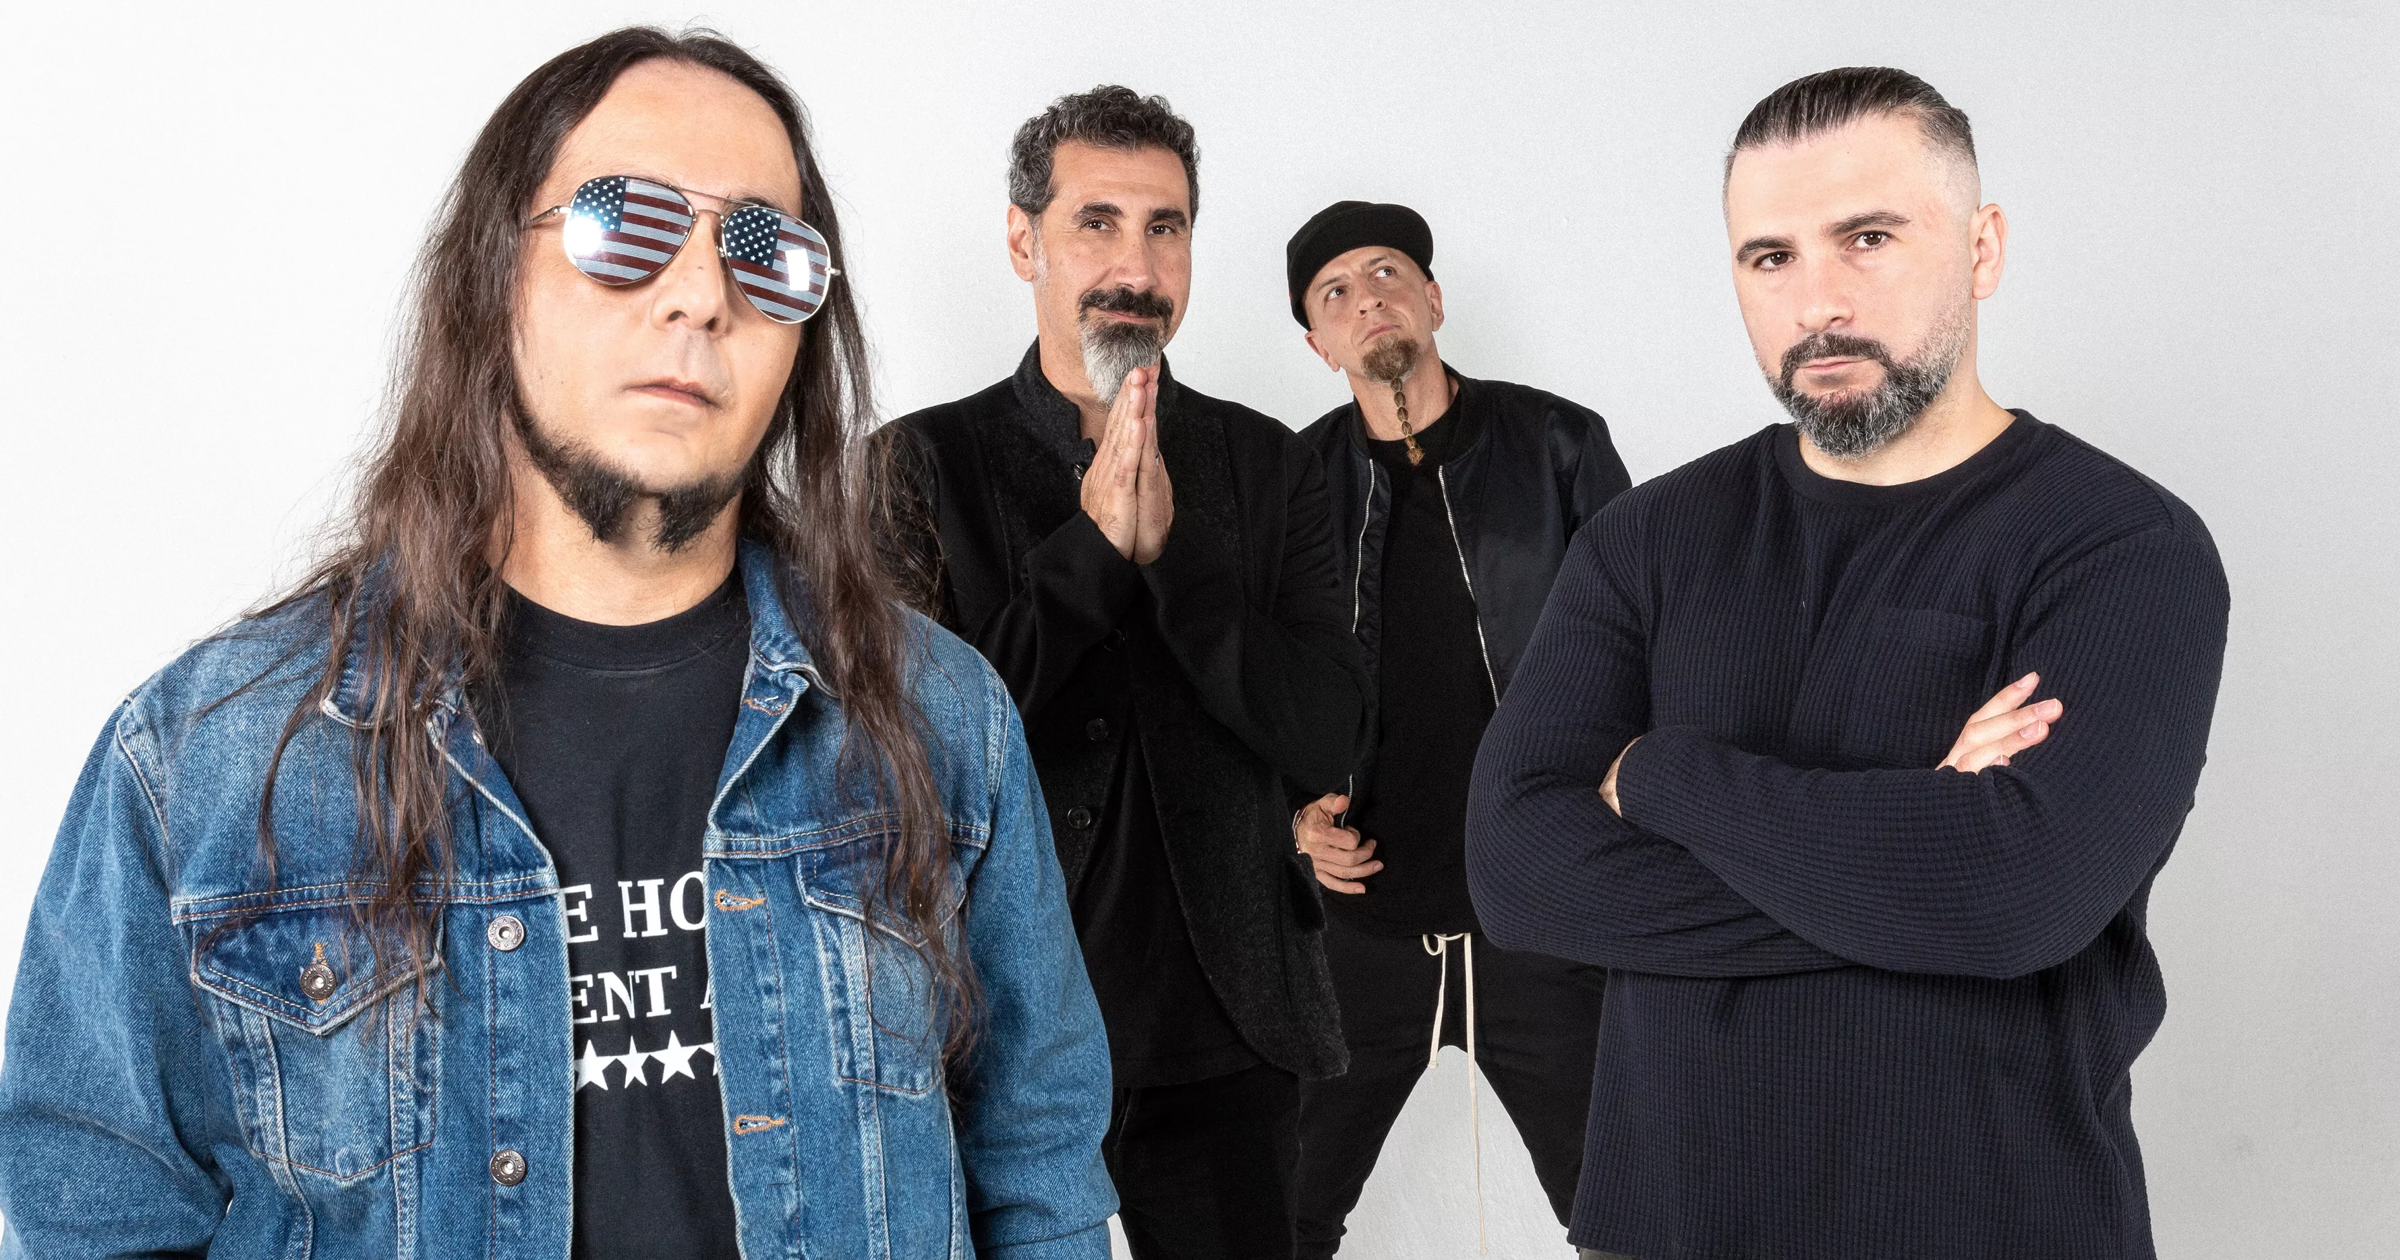 systemofadown2020-4725005-6539954-png